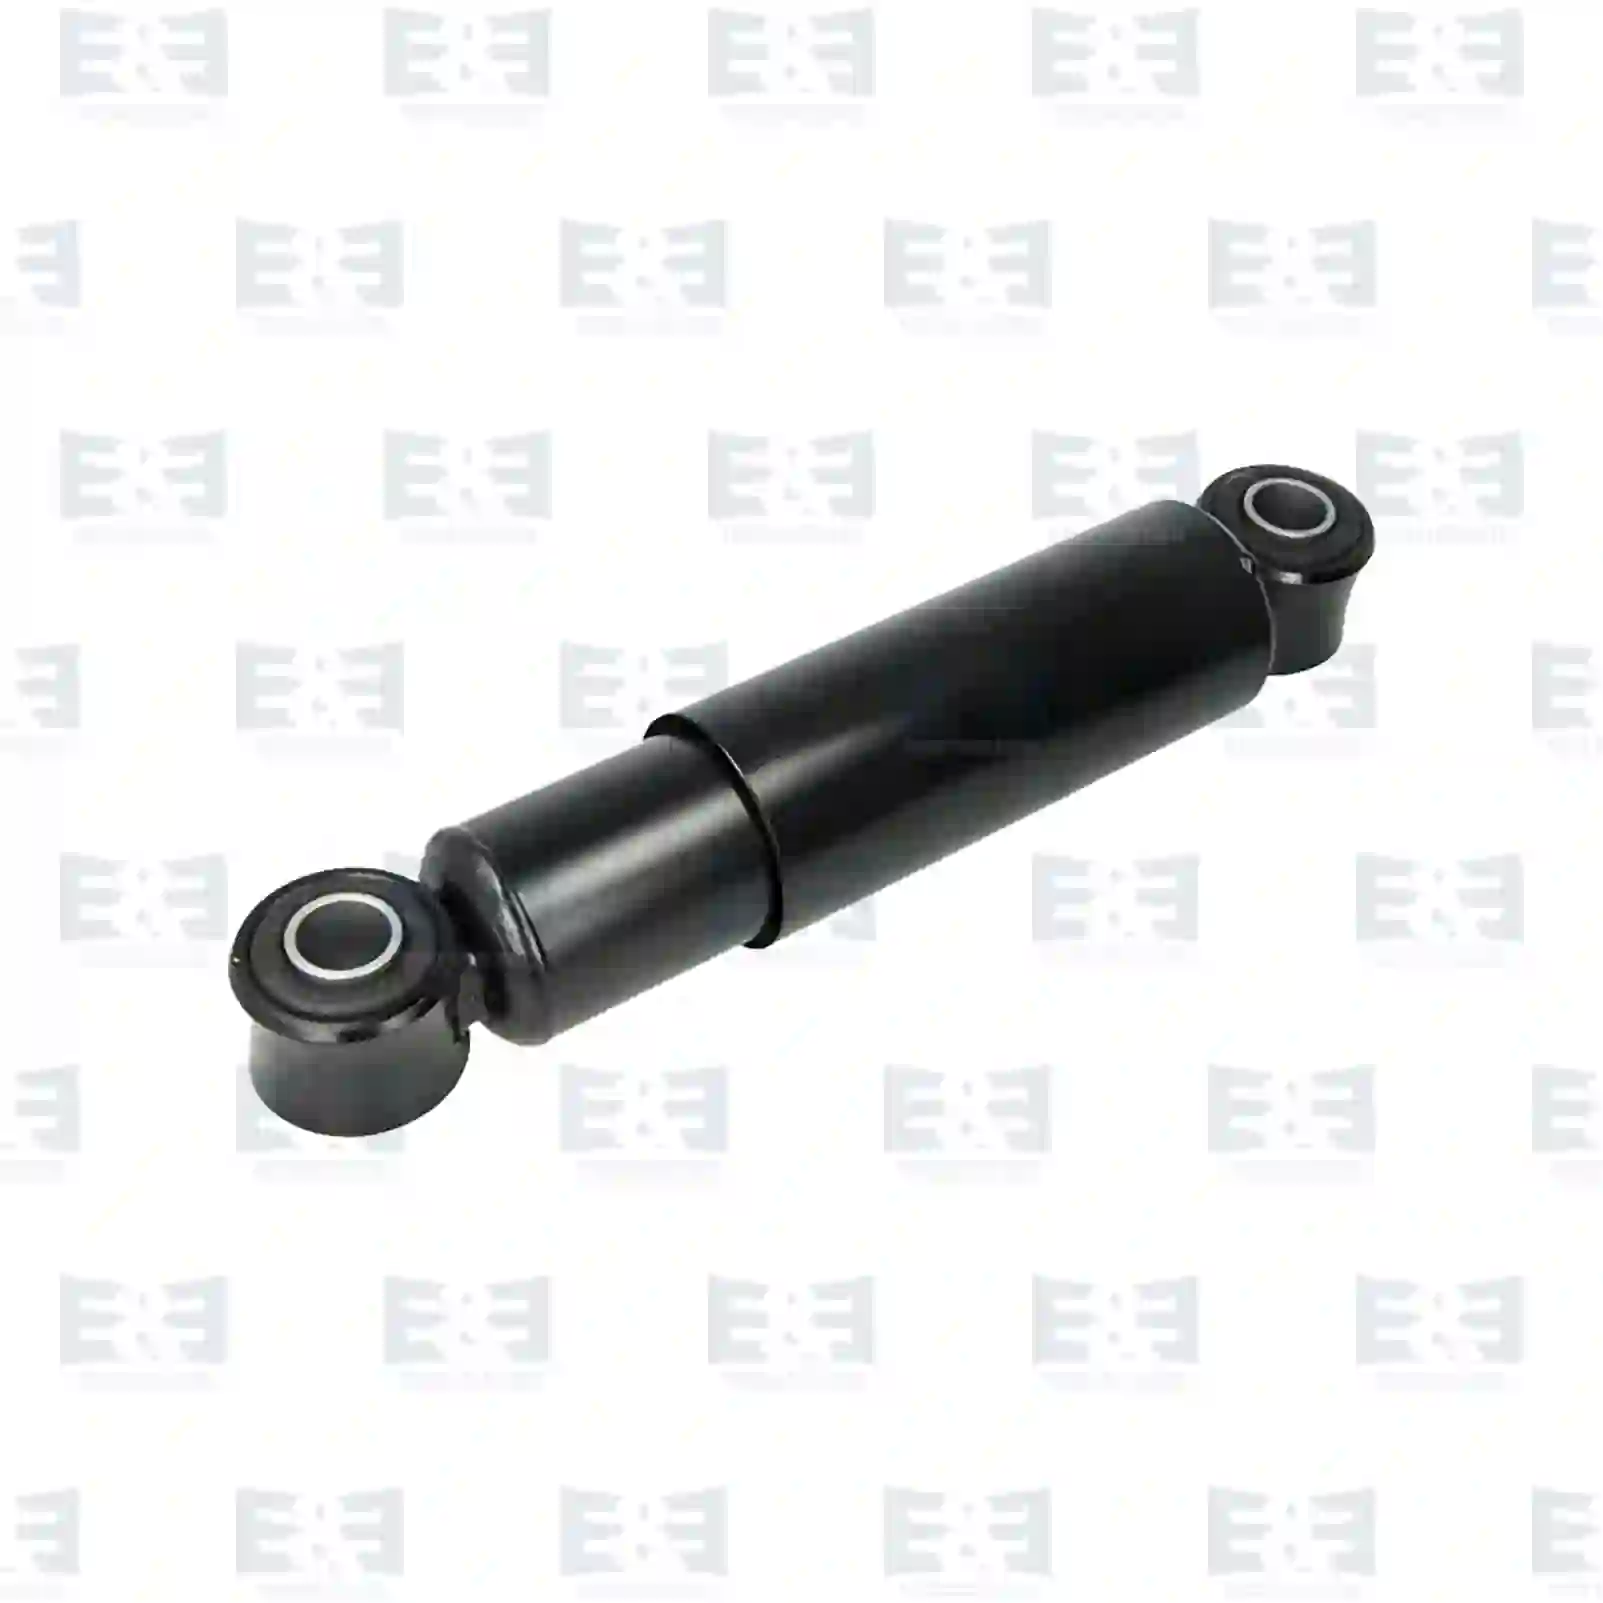 Shock Absorber Shock absorber, EE No 2E2281087 ,  oem no:0237027000, 196119, 700196119, 6606688, 2376002700, 2376003500, 2376402700, 013774, 016270, ZG41542-0008 E&E Truck Spare Parts | Truck Spare Parts, Auotomotive Spare Parts